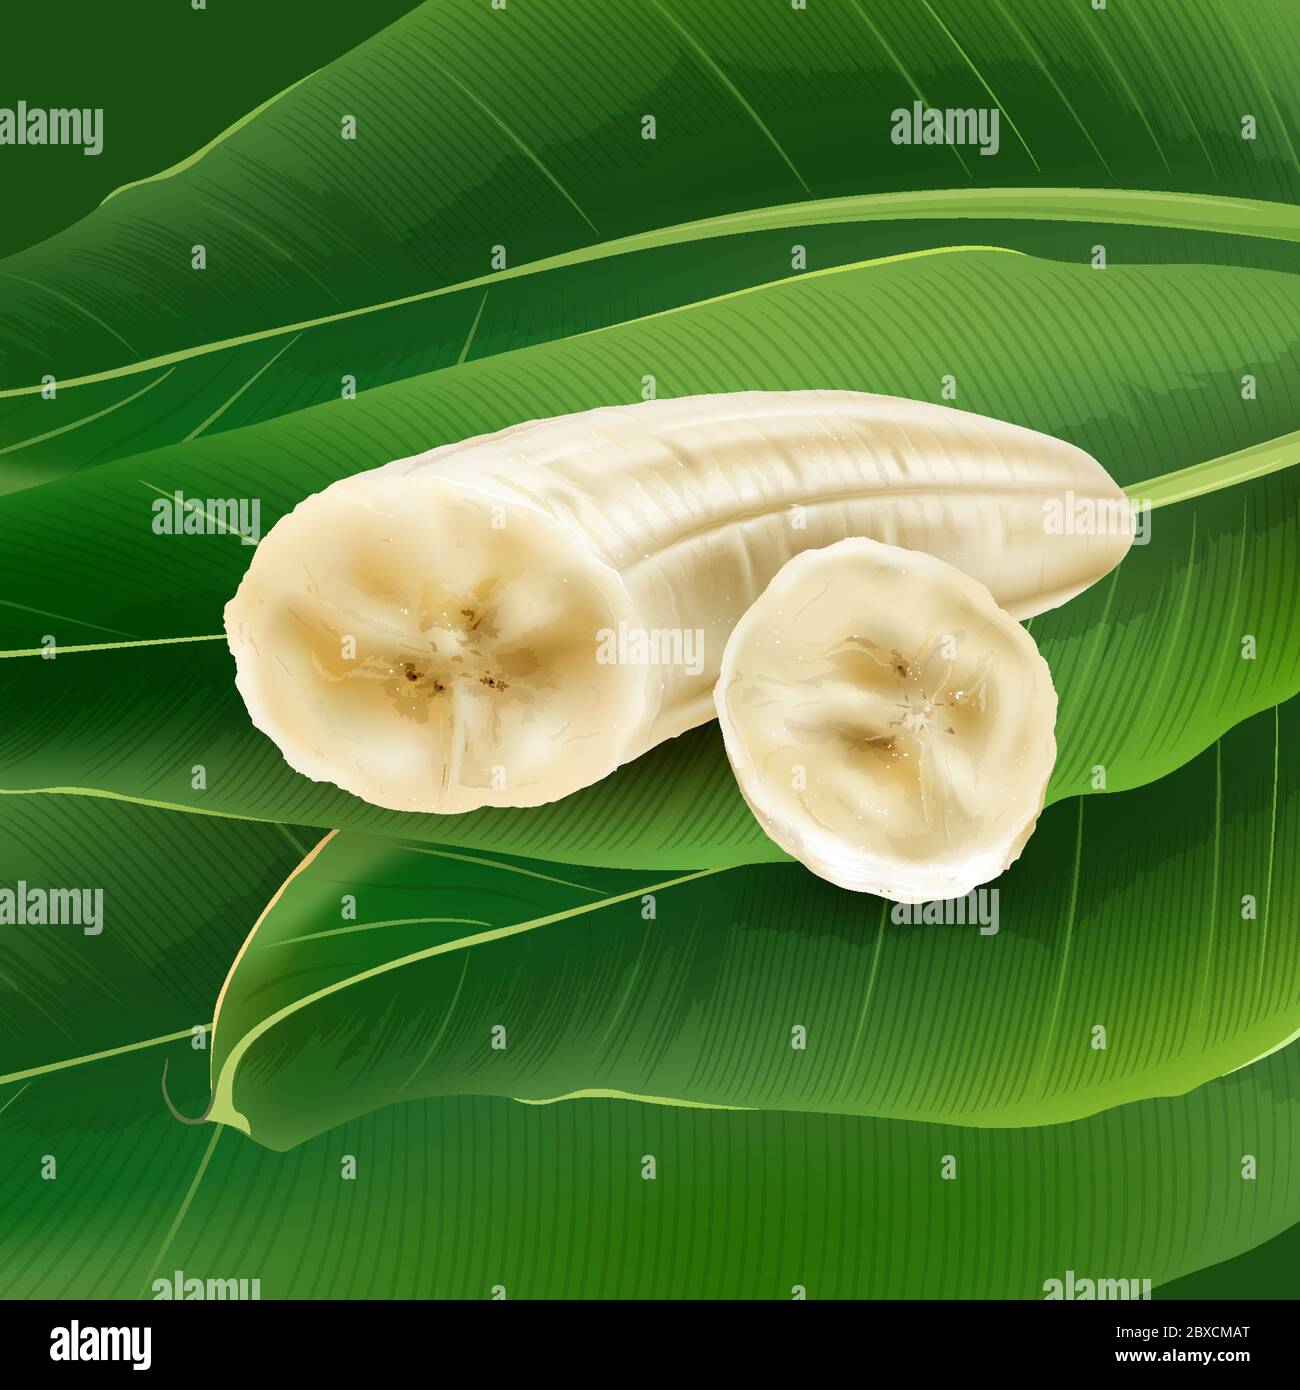 Banana slices on a background of green palm leaves. Stock Vector